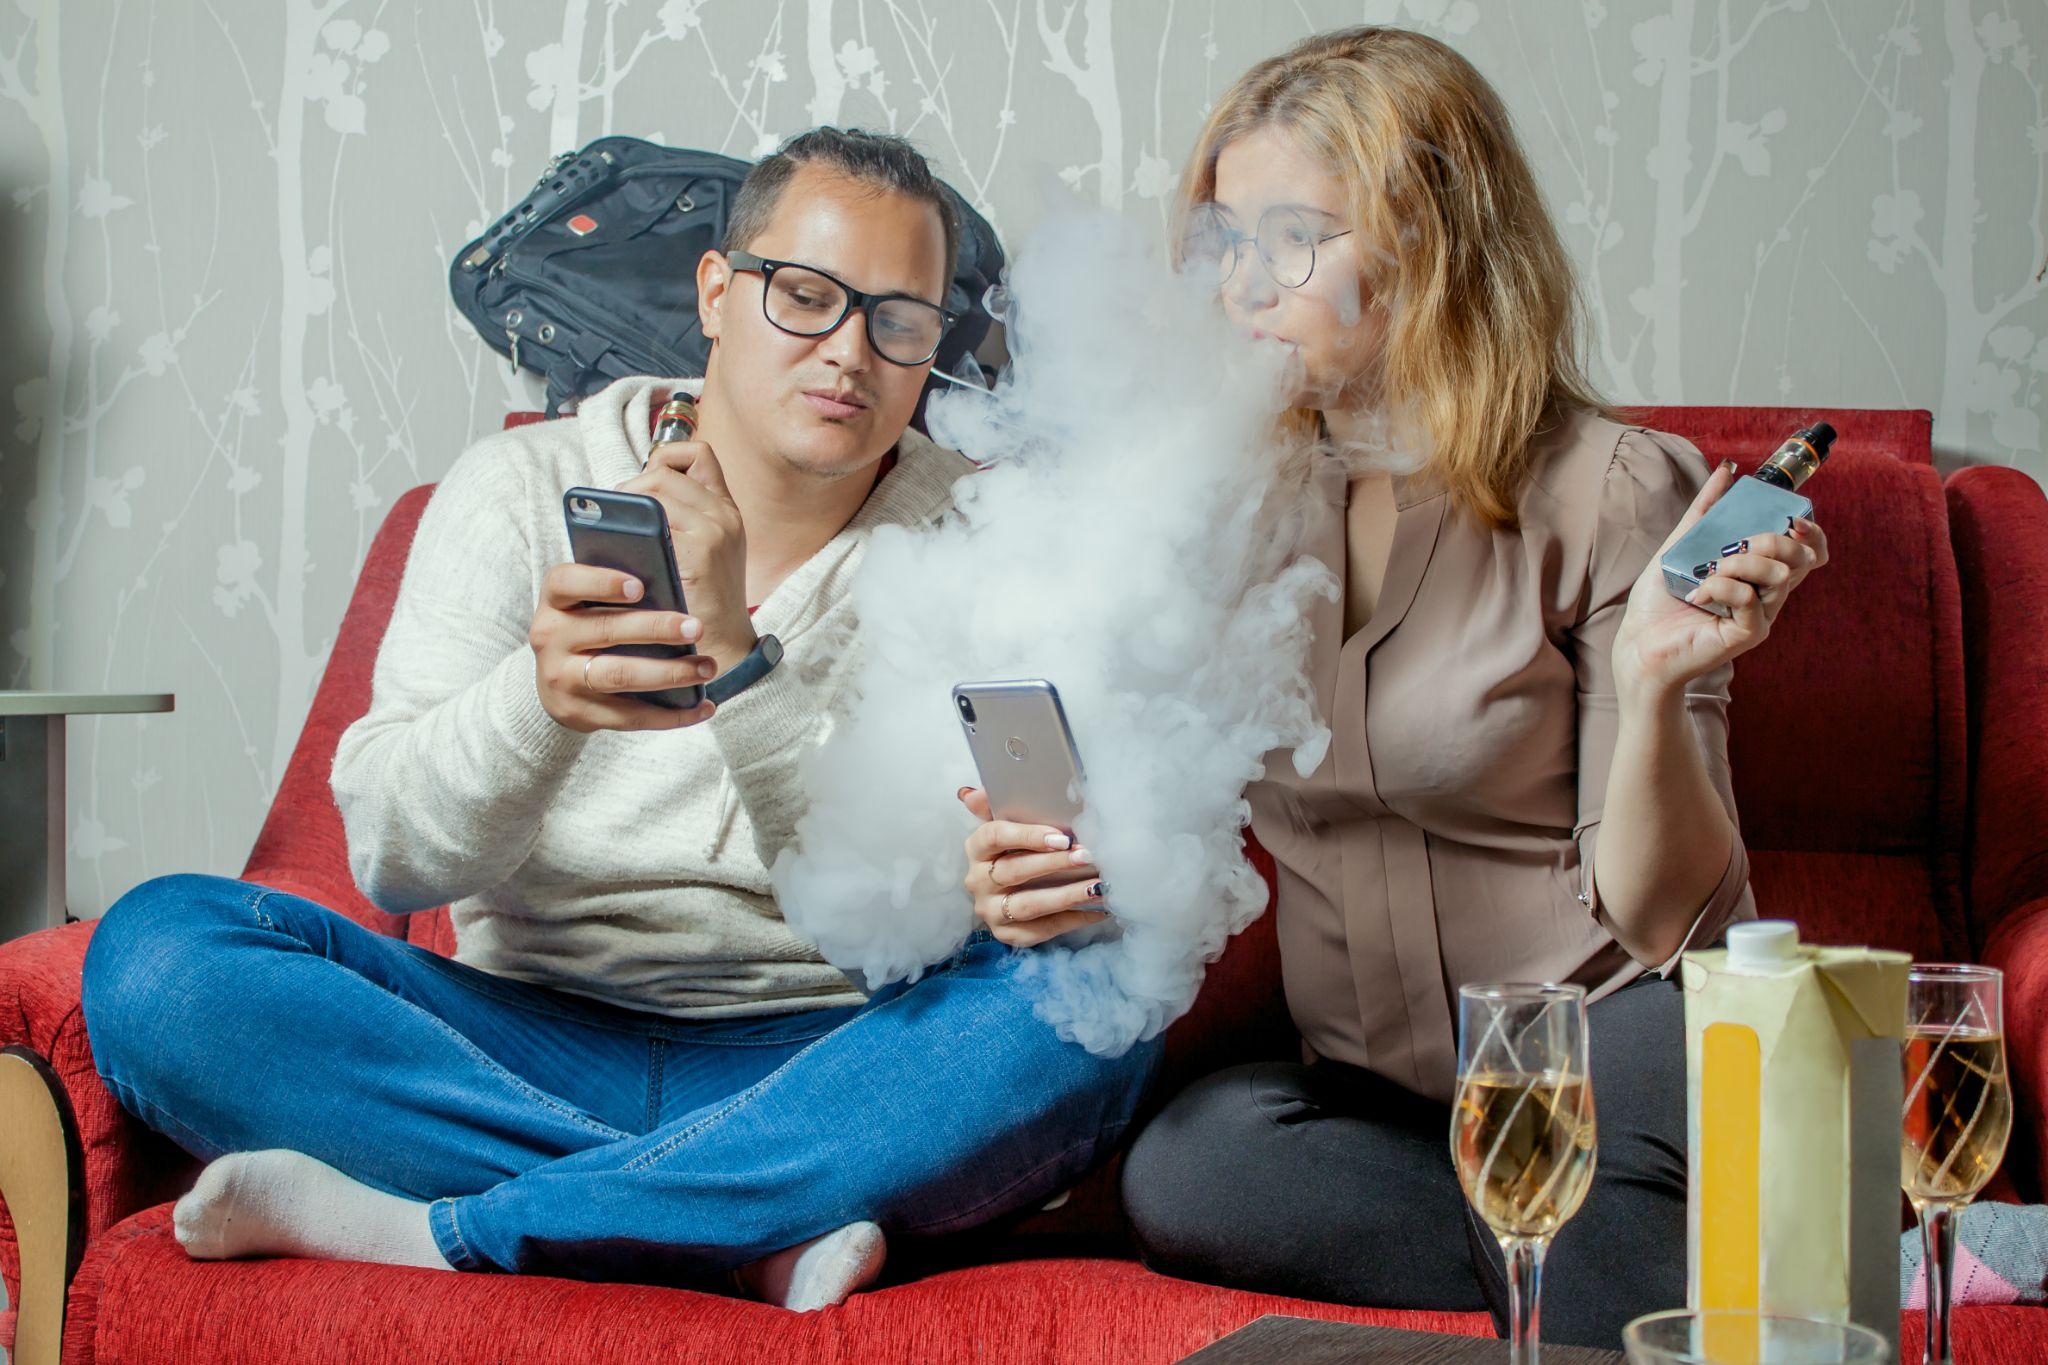 Students relaxing at home, showing to eachother their phones and vaping